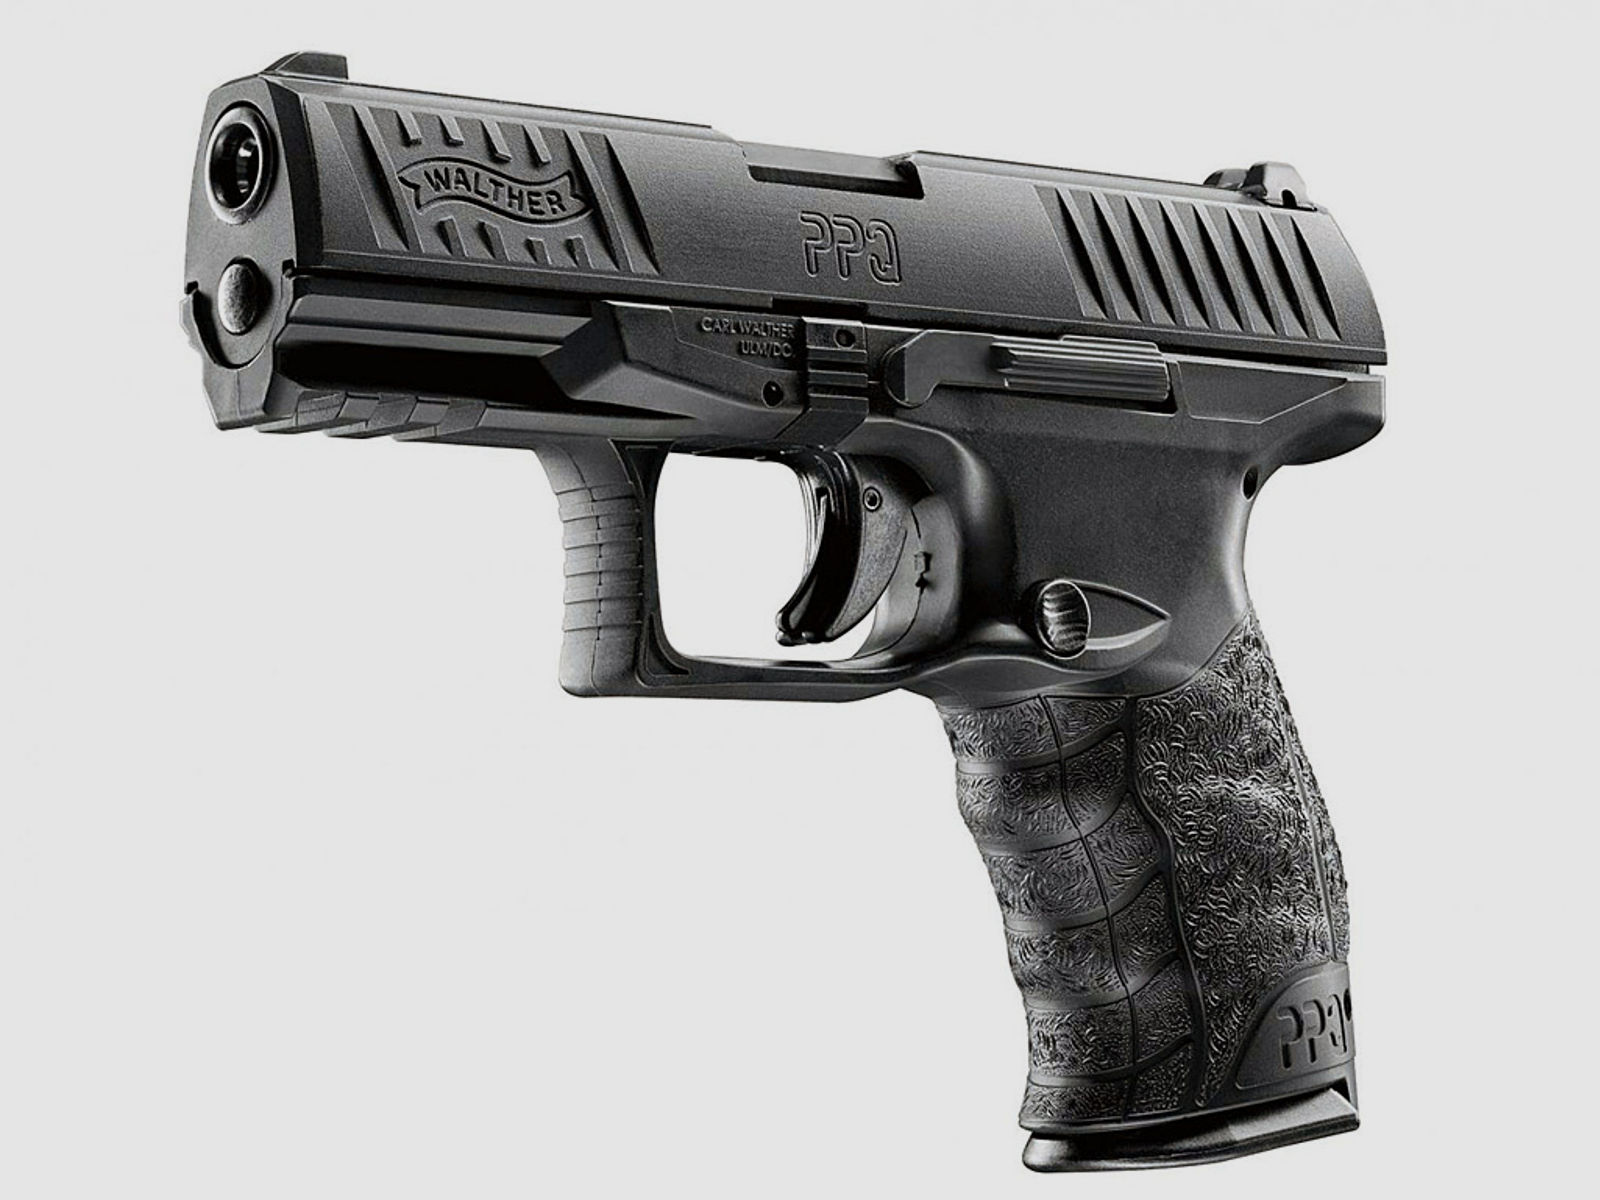 Softairpistole Walther PPQ M2 Gas Blow Back GBB Kaliber 6 mm BB (P18)